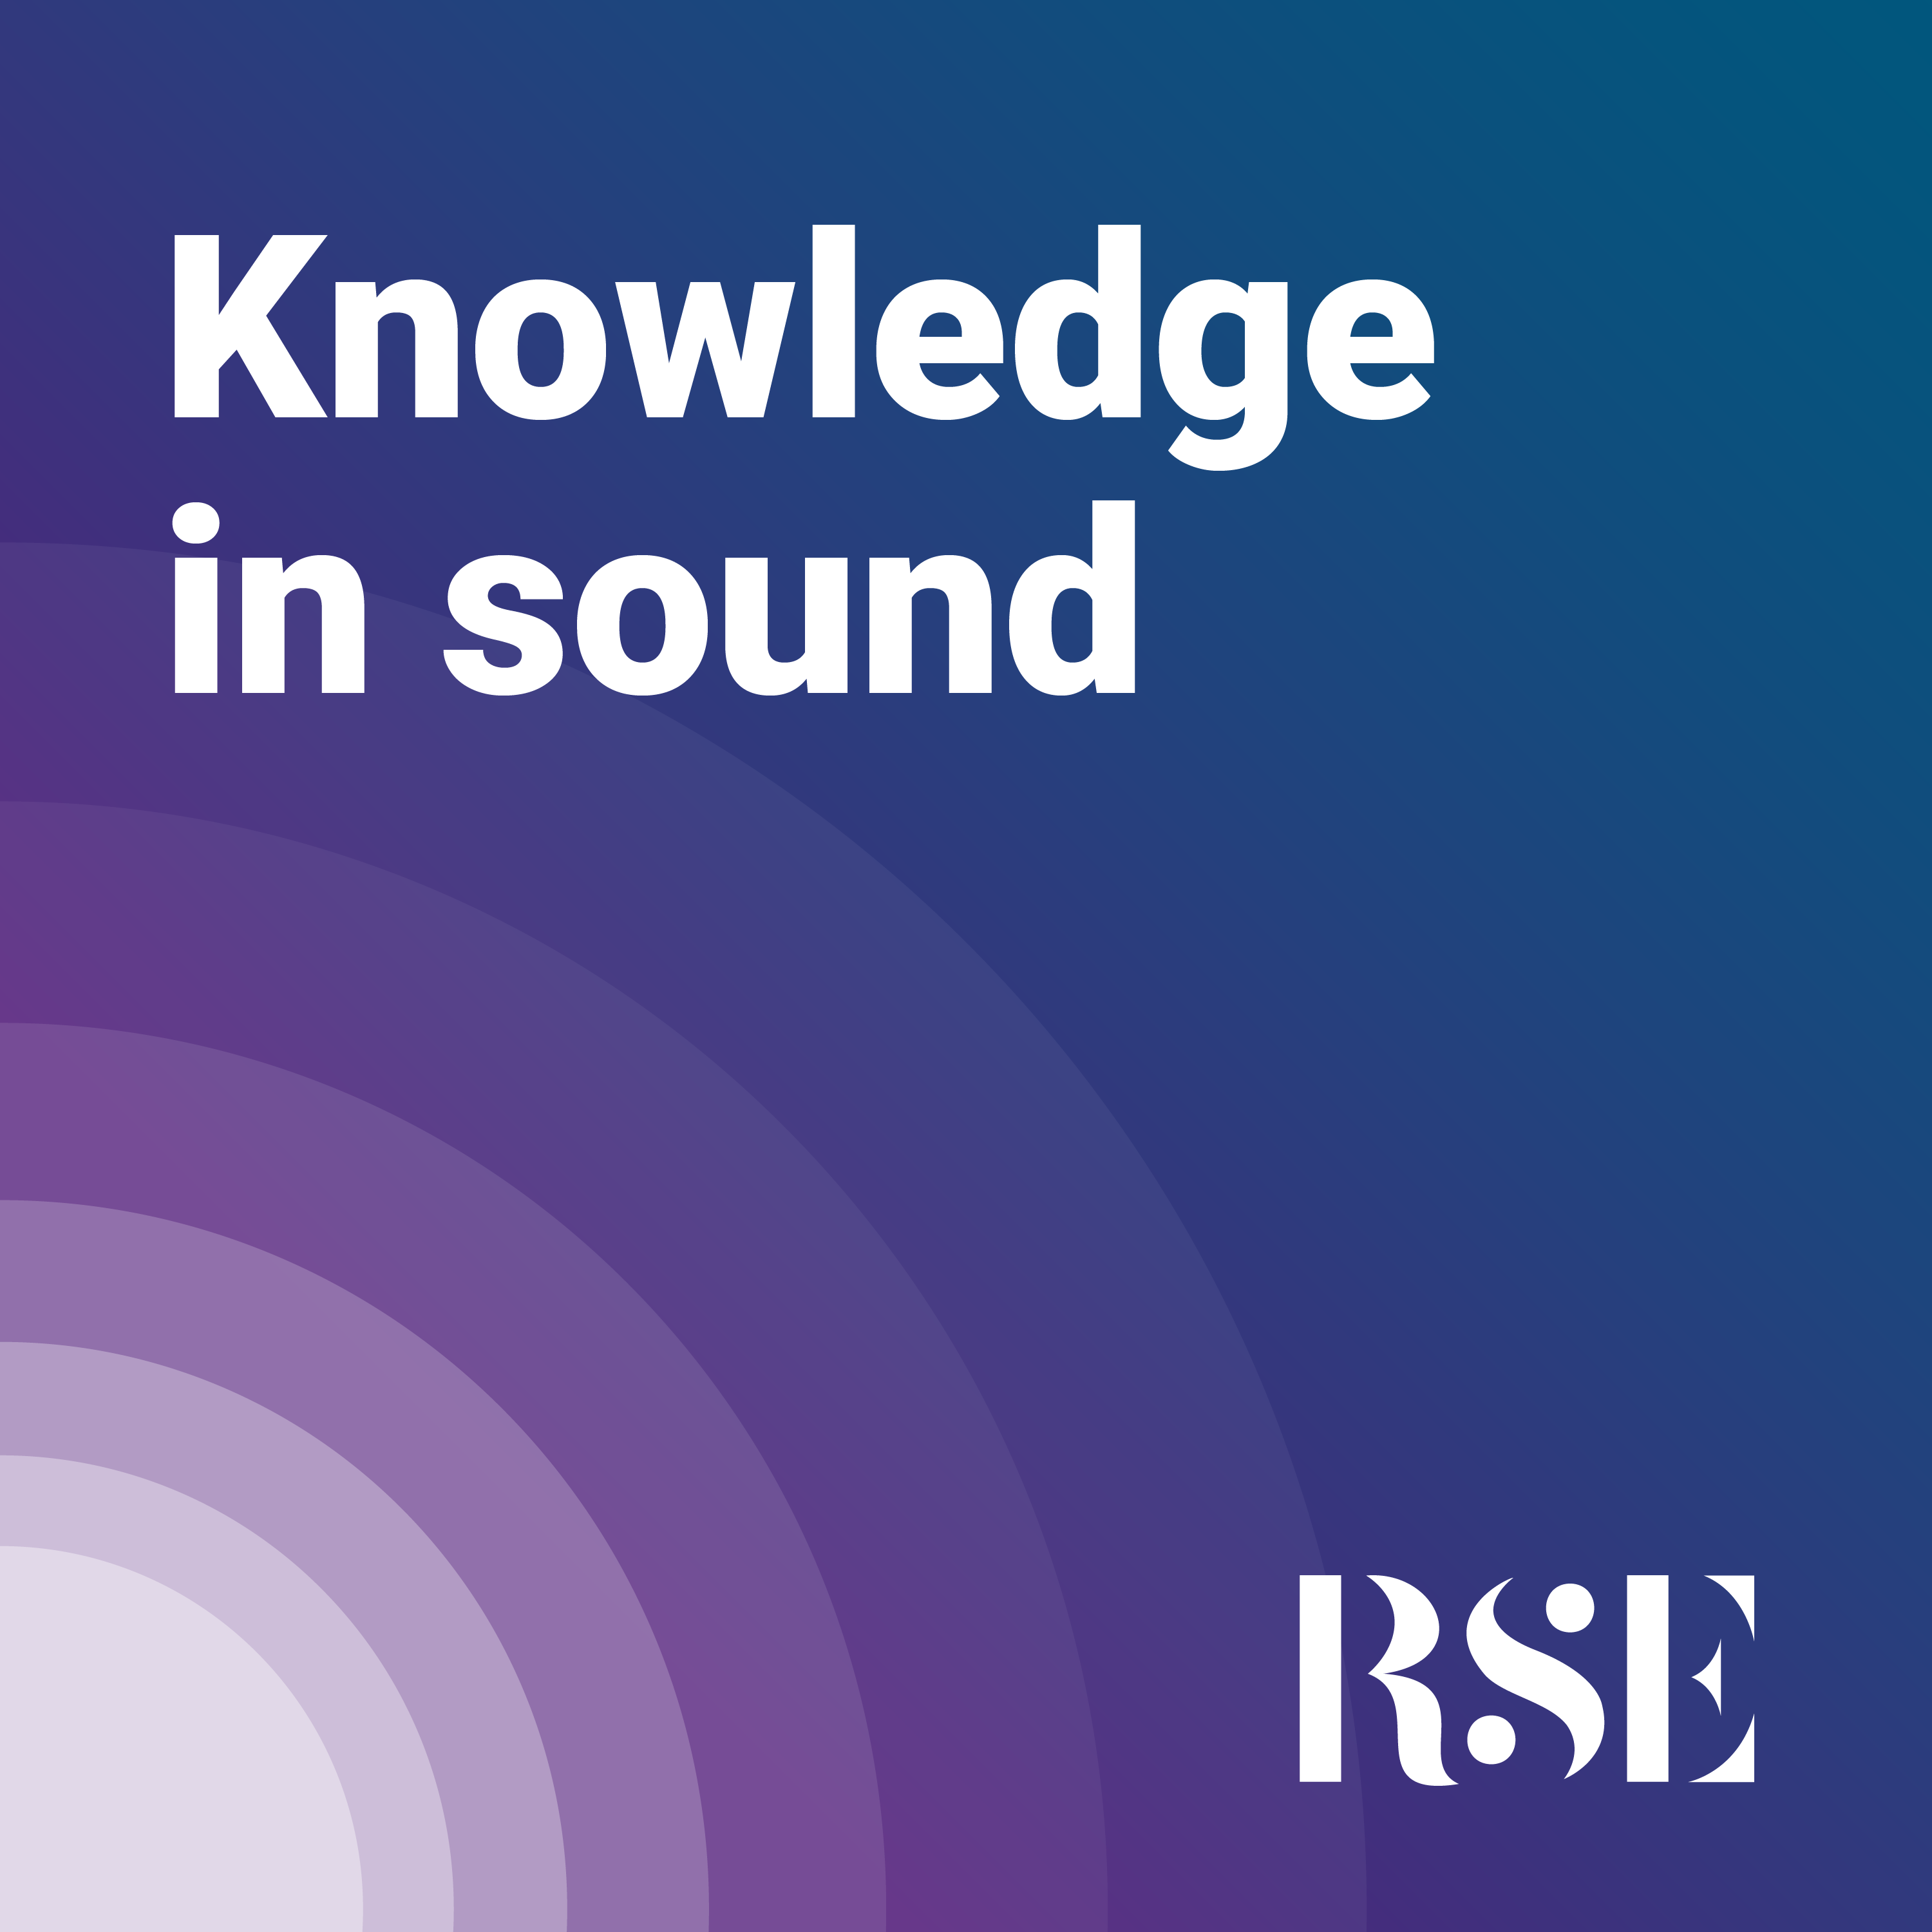 Knowledge in sound